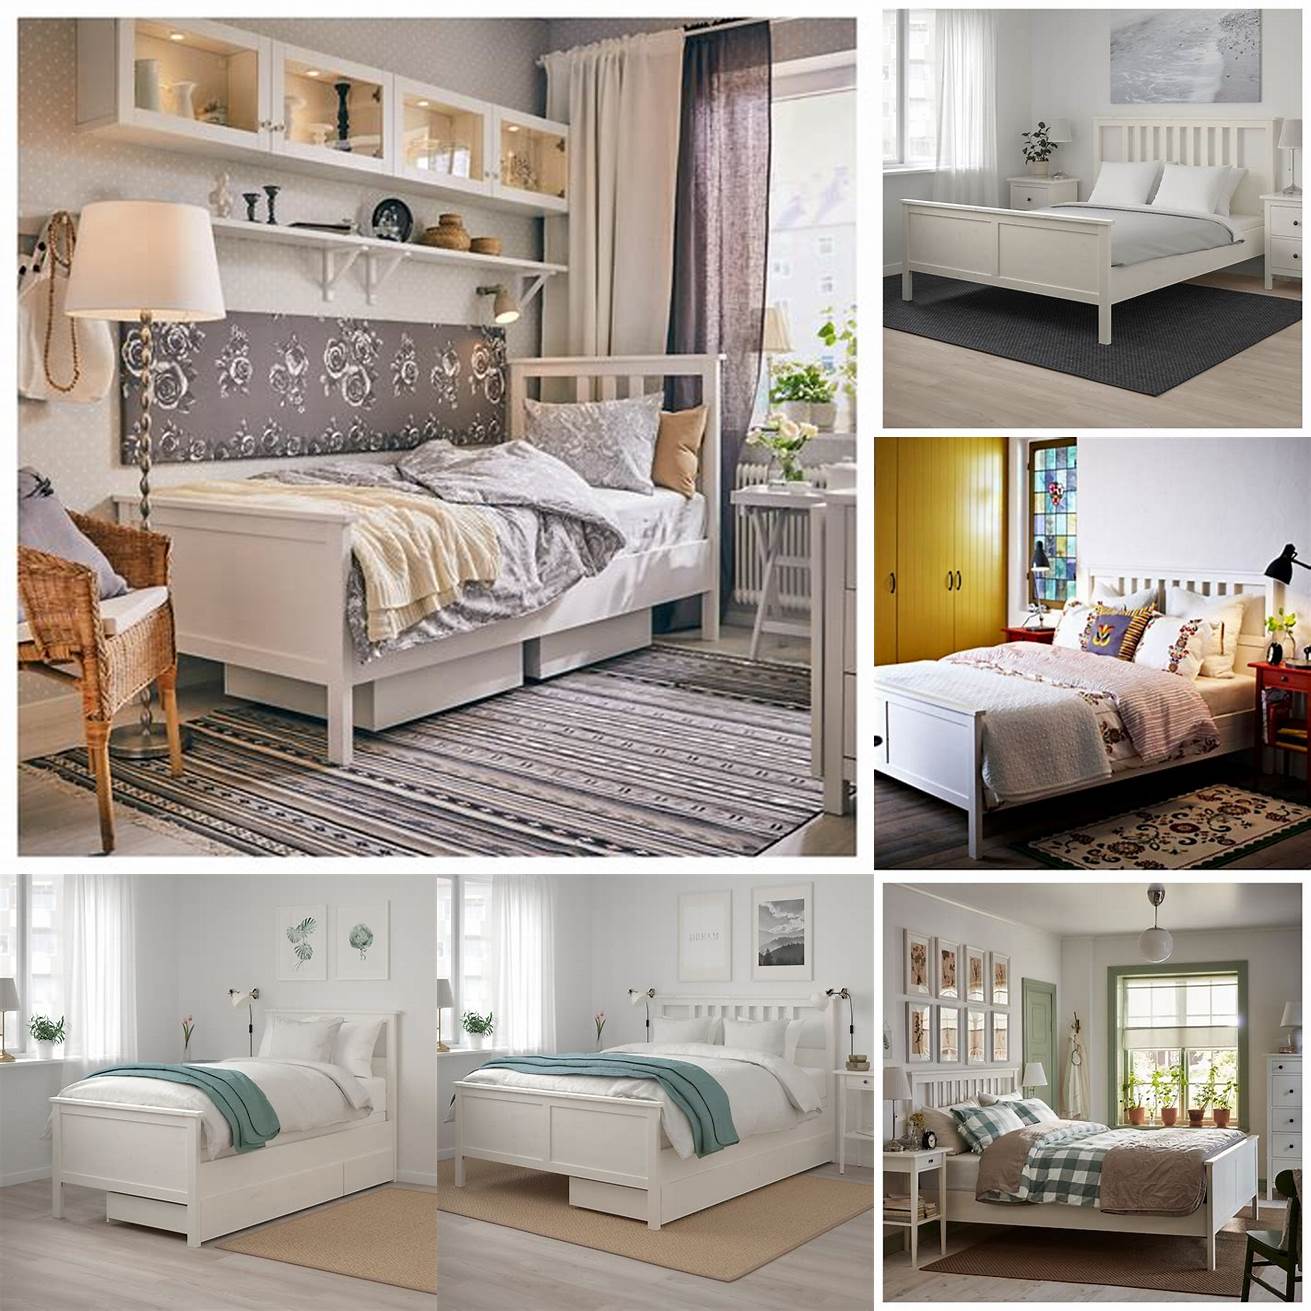 The Hemnes Bed Frame with white linen sheets and pillows